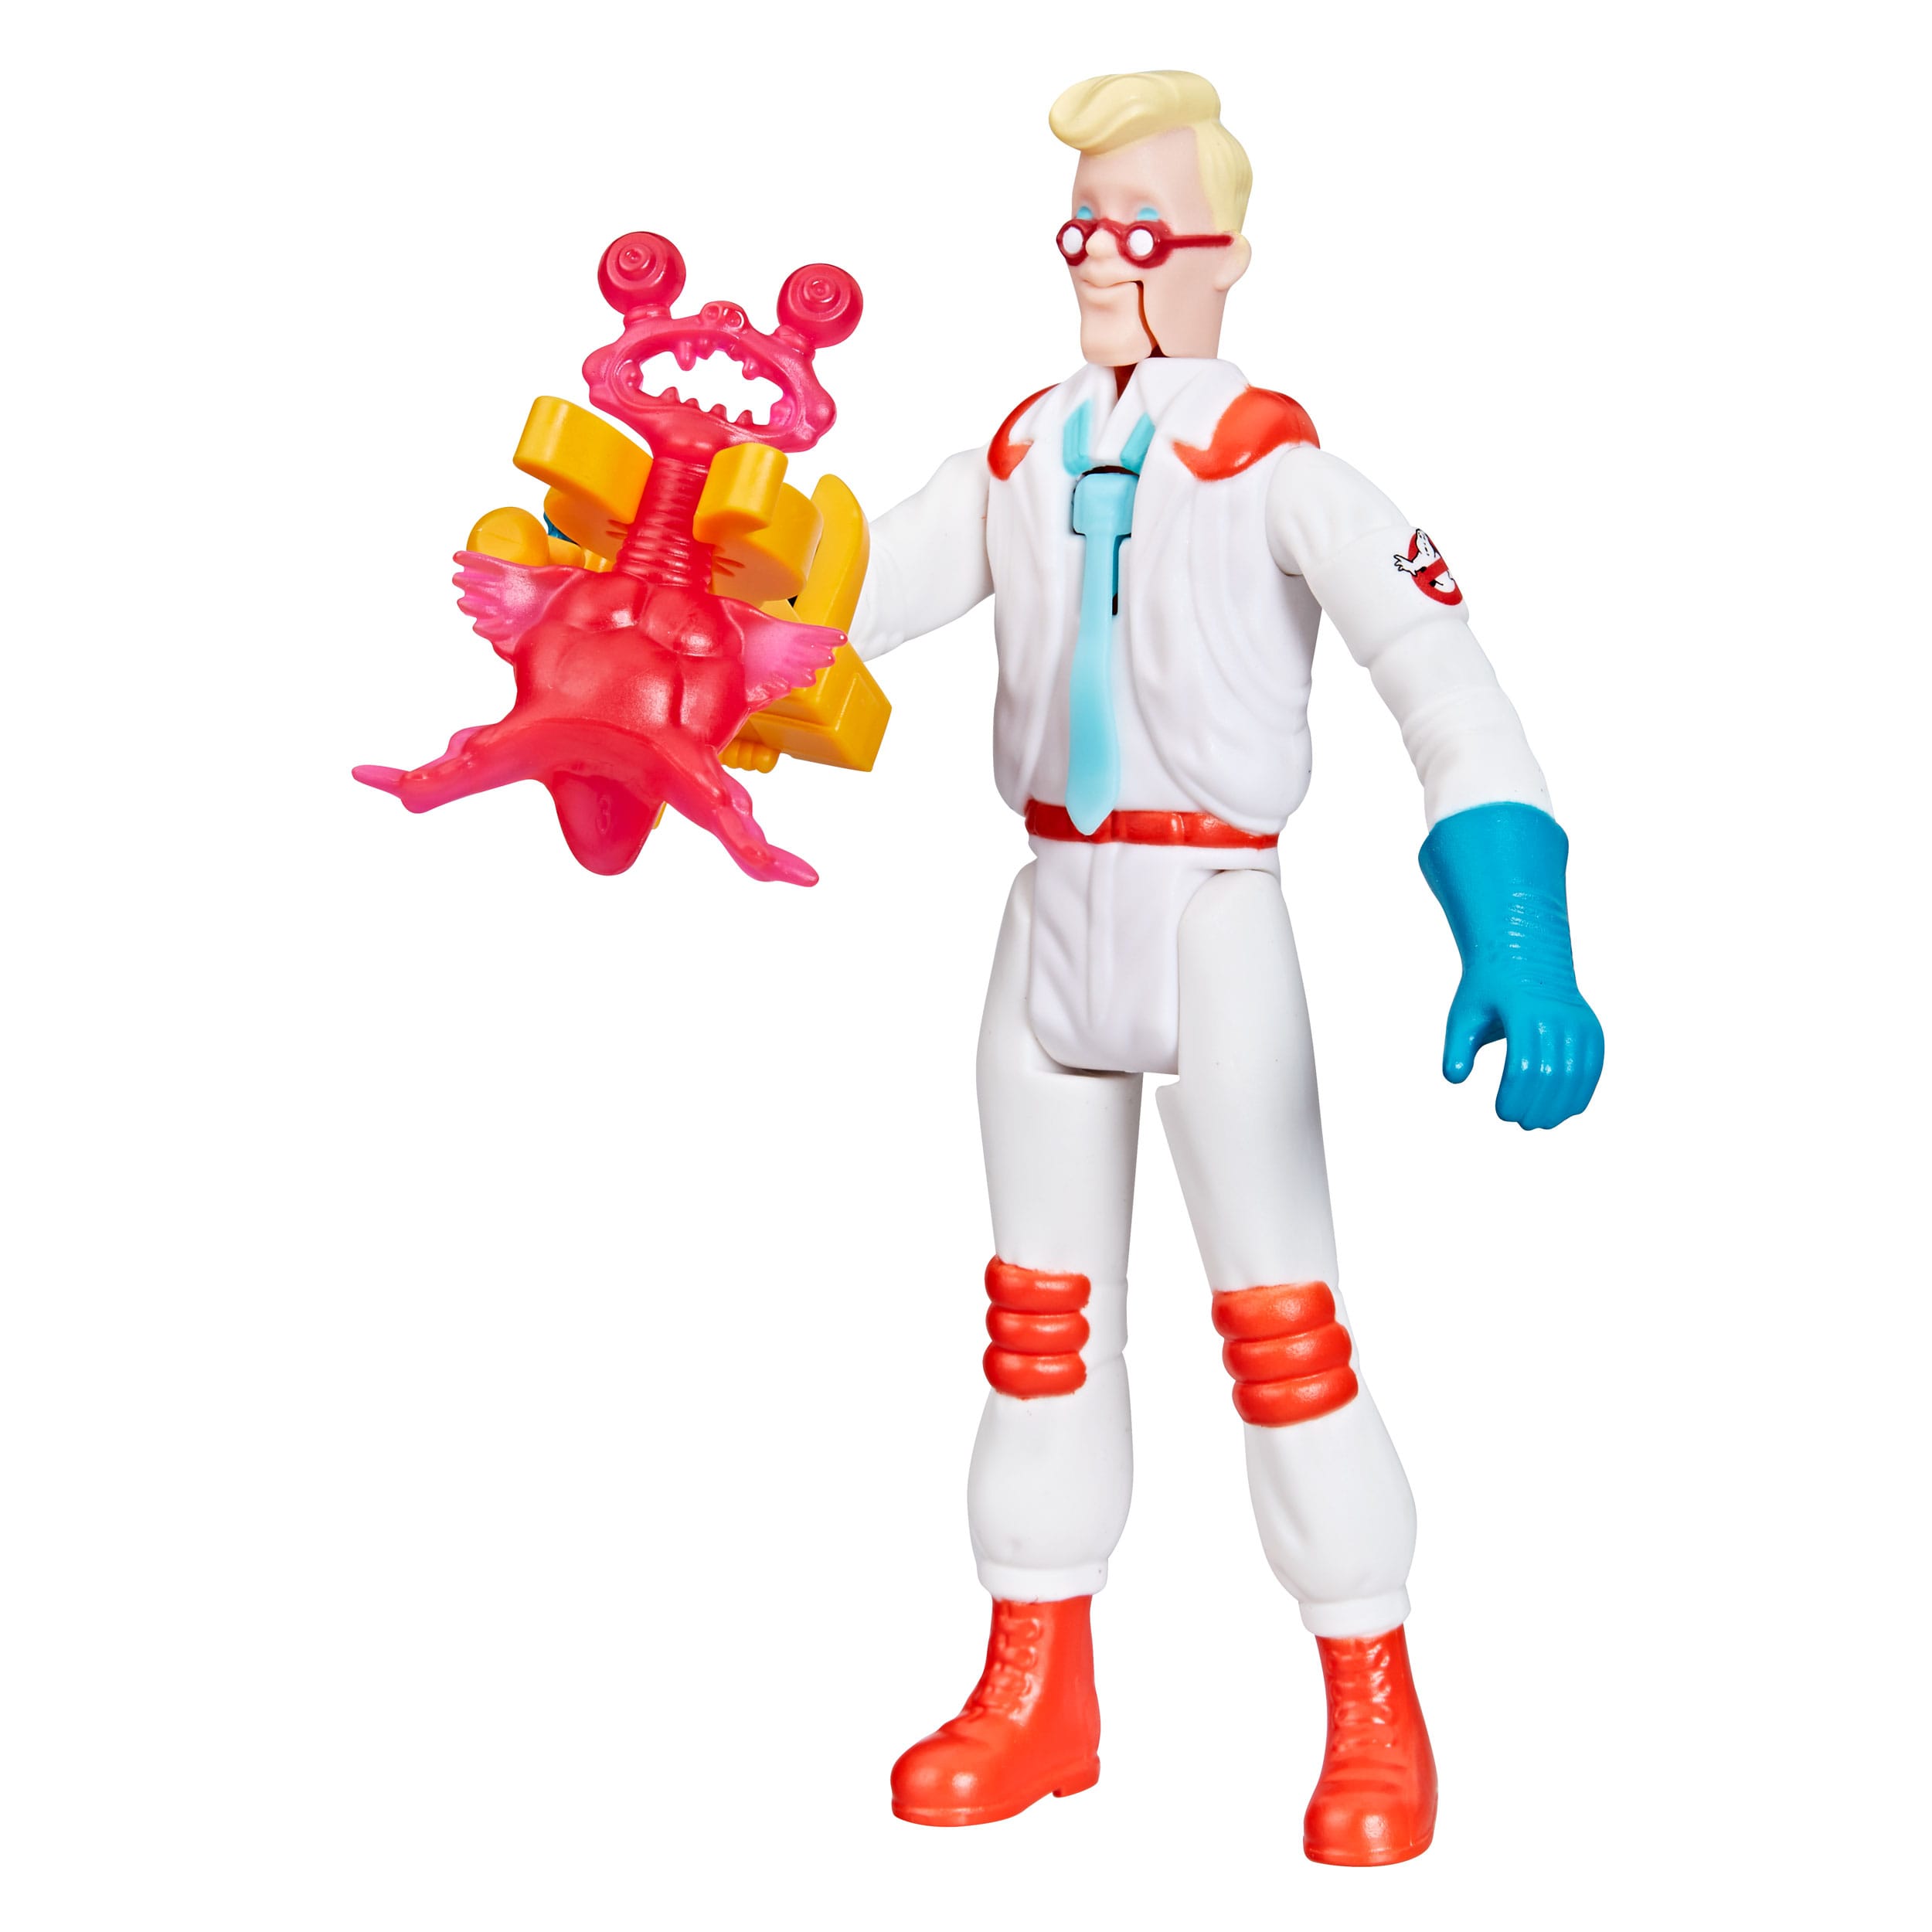 The Real Ghostbusters Kenner Classics Actionfigur Egon Spengler & Soar Throat Ghost HASF9891 5010996238658